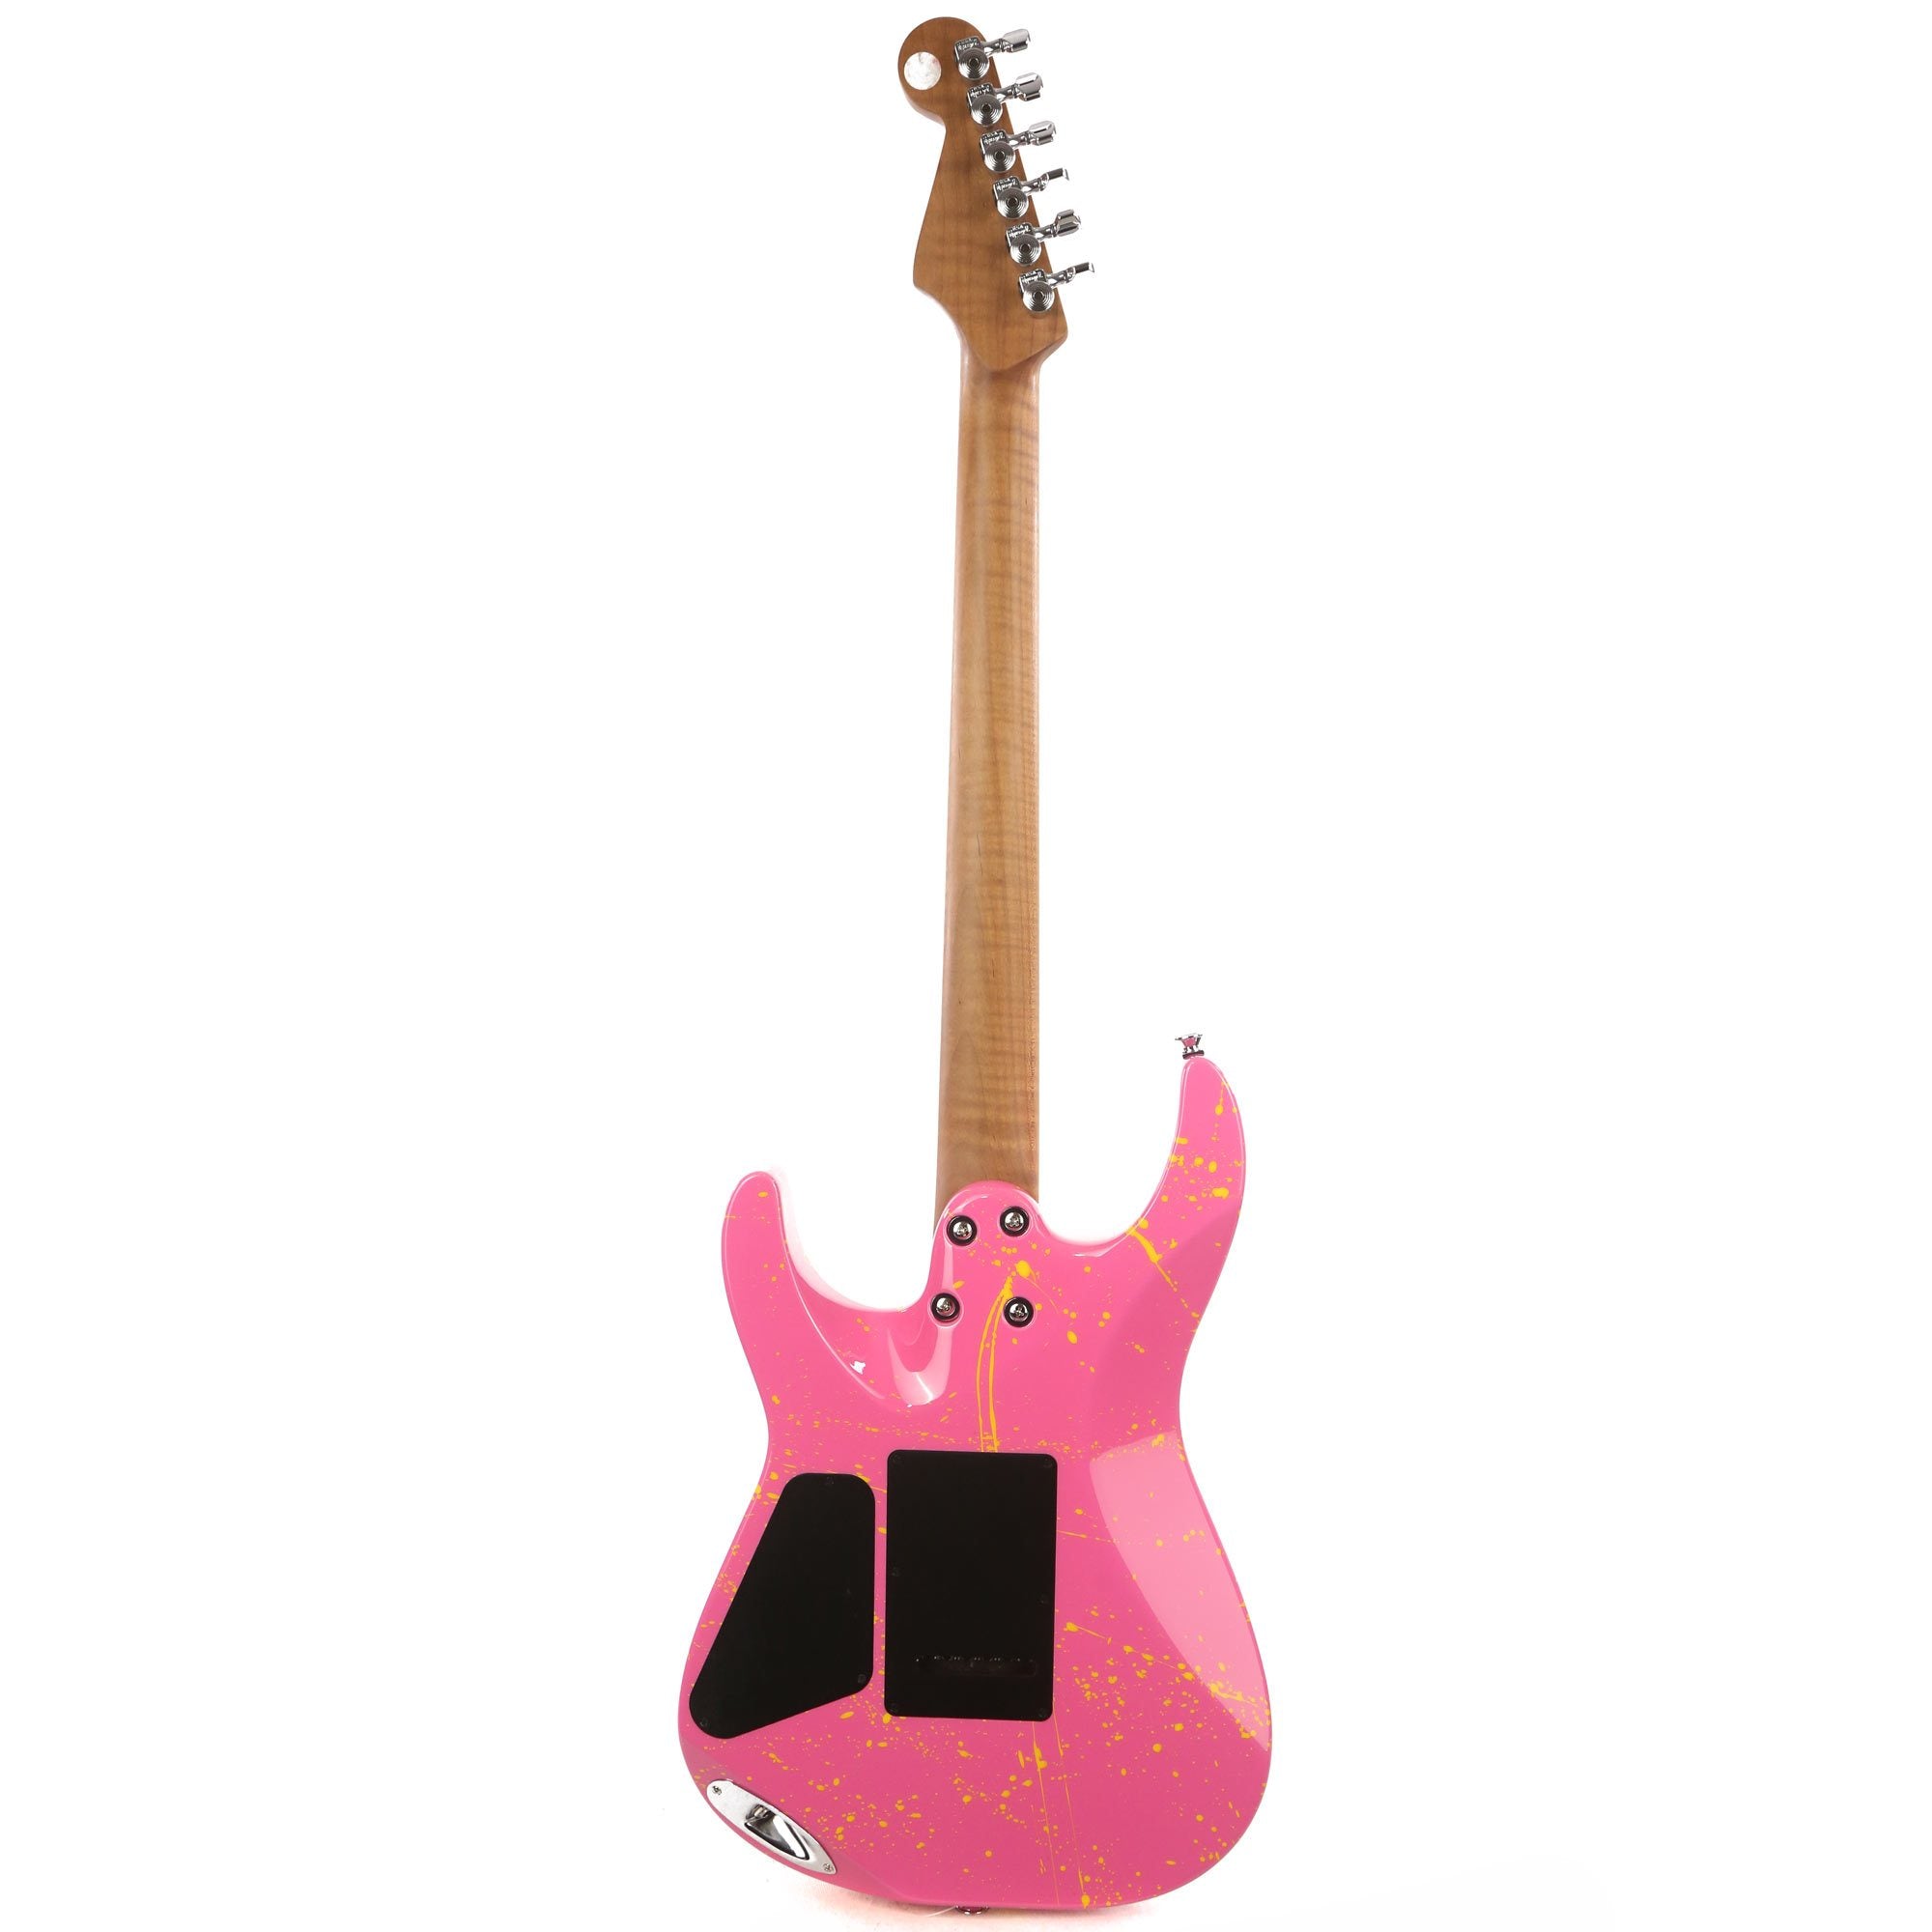 Charvel Custom Shop DK24 Dinky Pink | Re The Masterbuilt Zoo Yellow Splatter Music and